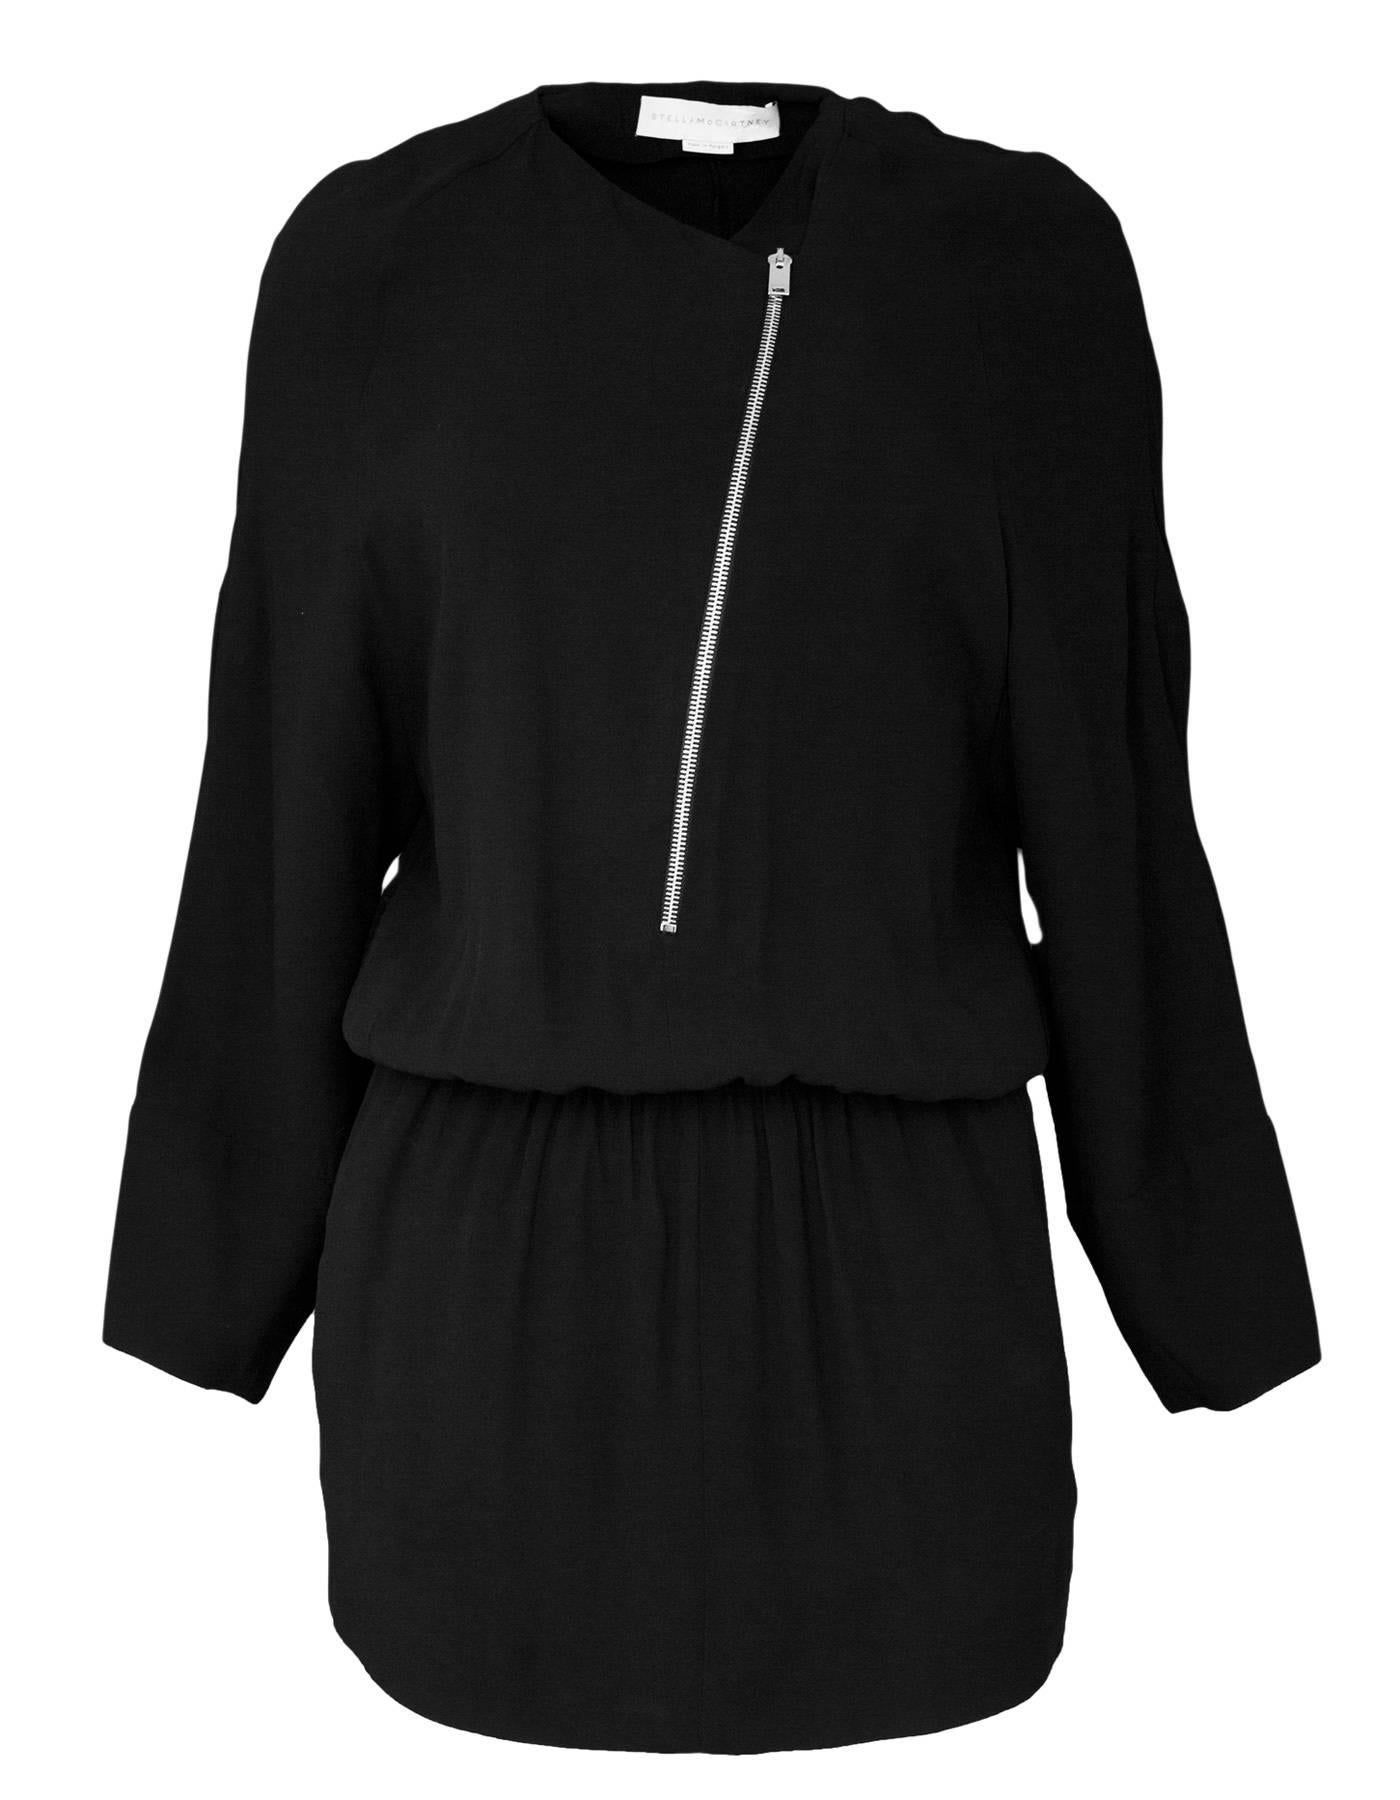 Stella McCartney Black Zip Front Tunic Sz IT38

Made In: Hungary
Color: Black
Composition: 59% rayon, 41% acetate
Lining: None
Closure/Opening: Pull over - stretch waistband
Exterior Pockets: Slit side pockets
Overall Condition: Excellent pre-owned